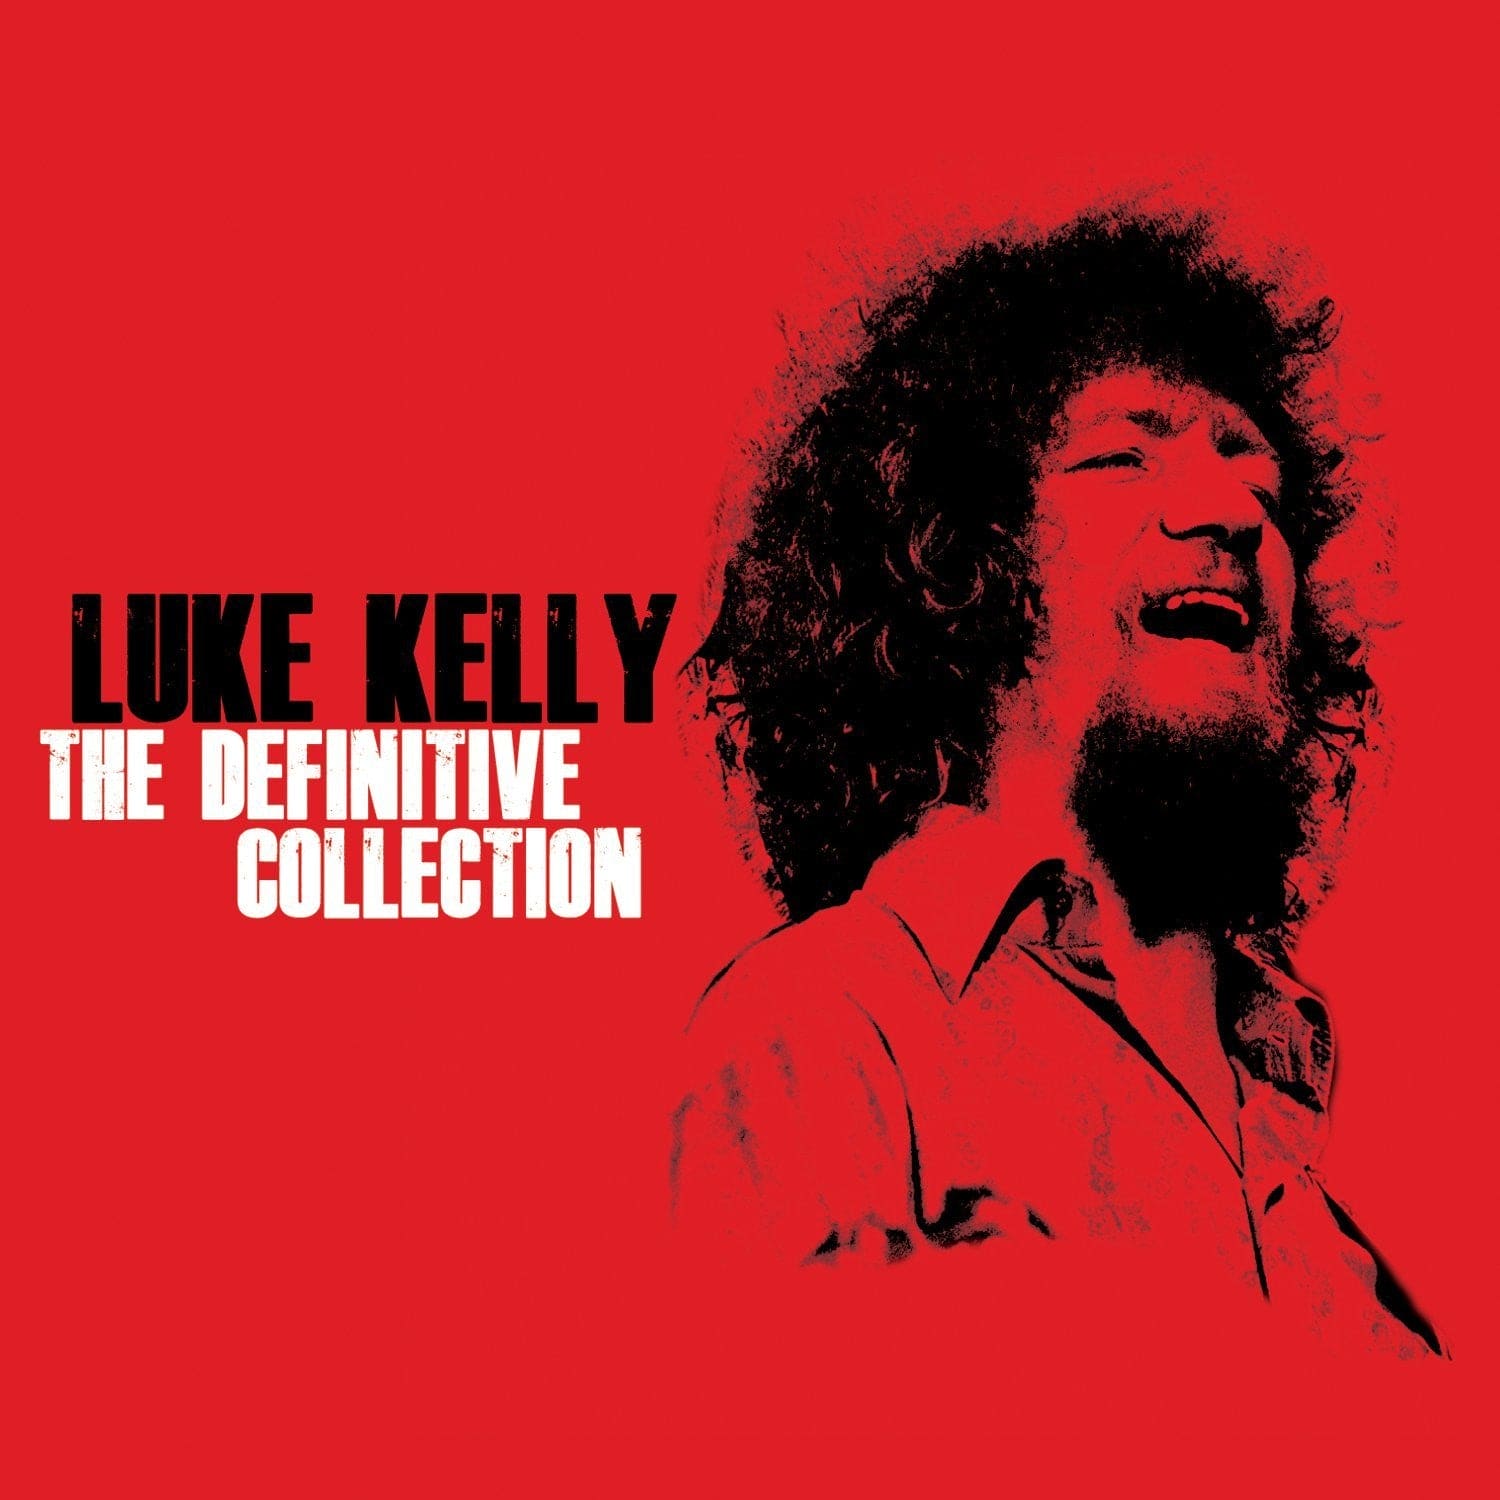 The Definitive Collection - Luke Kelly [2CD]